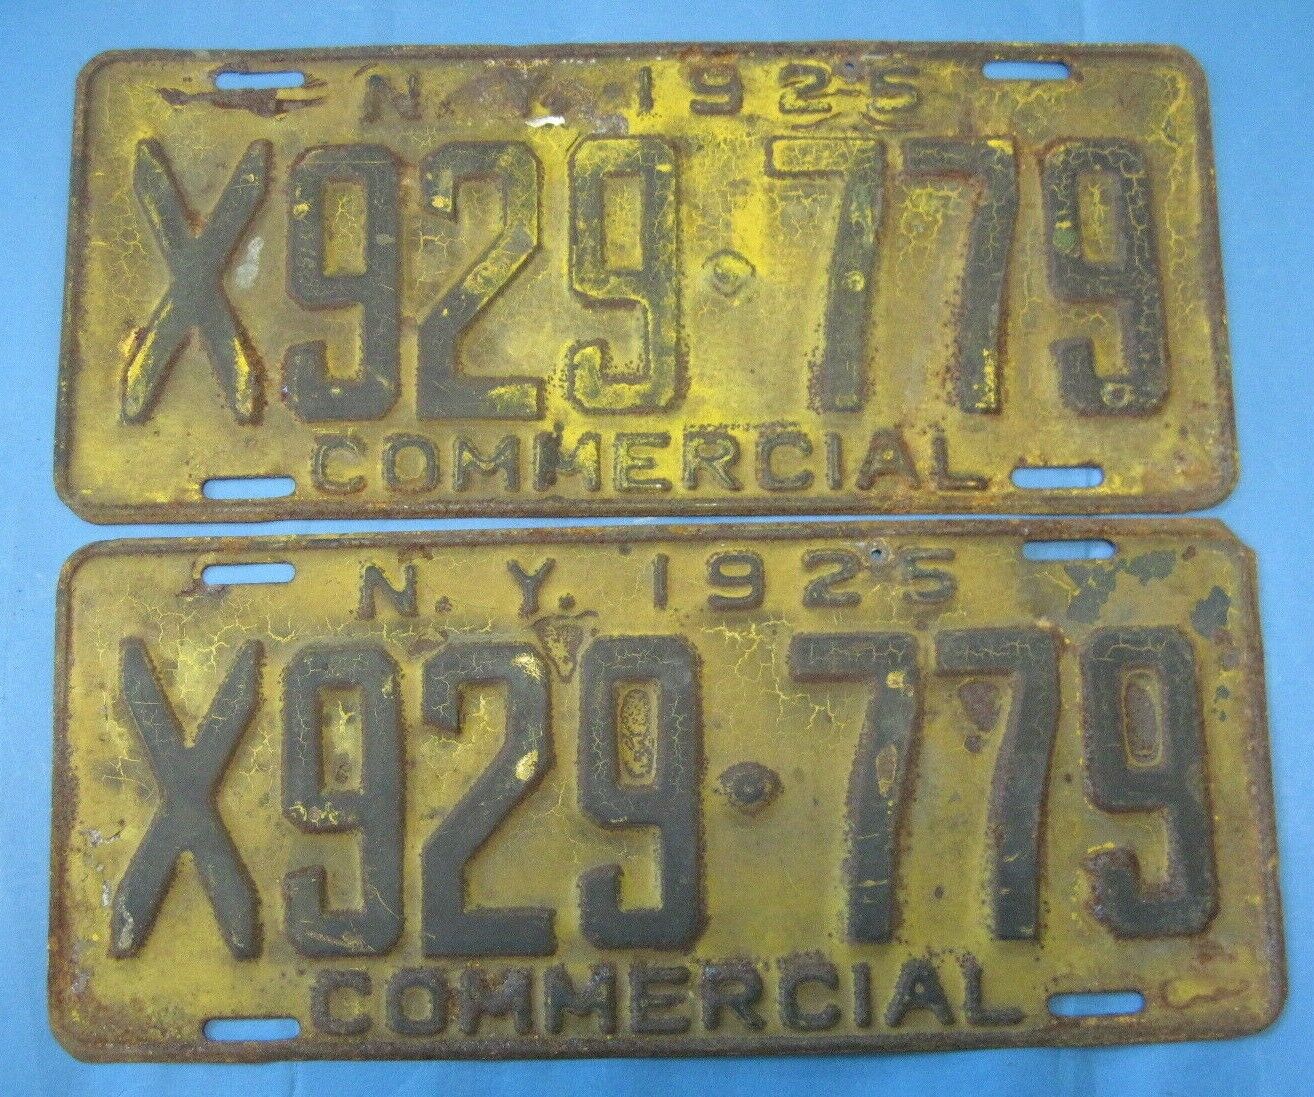 Matched pair of 1925 New York Commercial license plates 